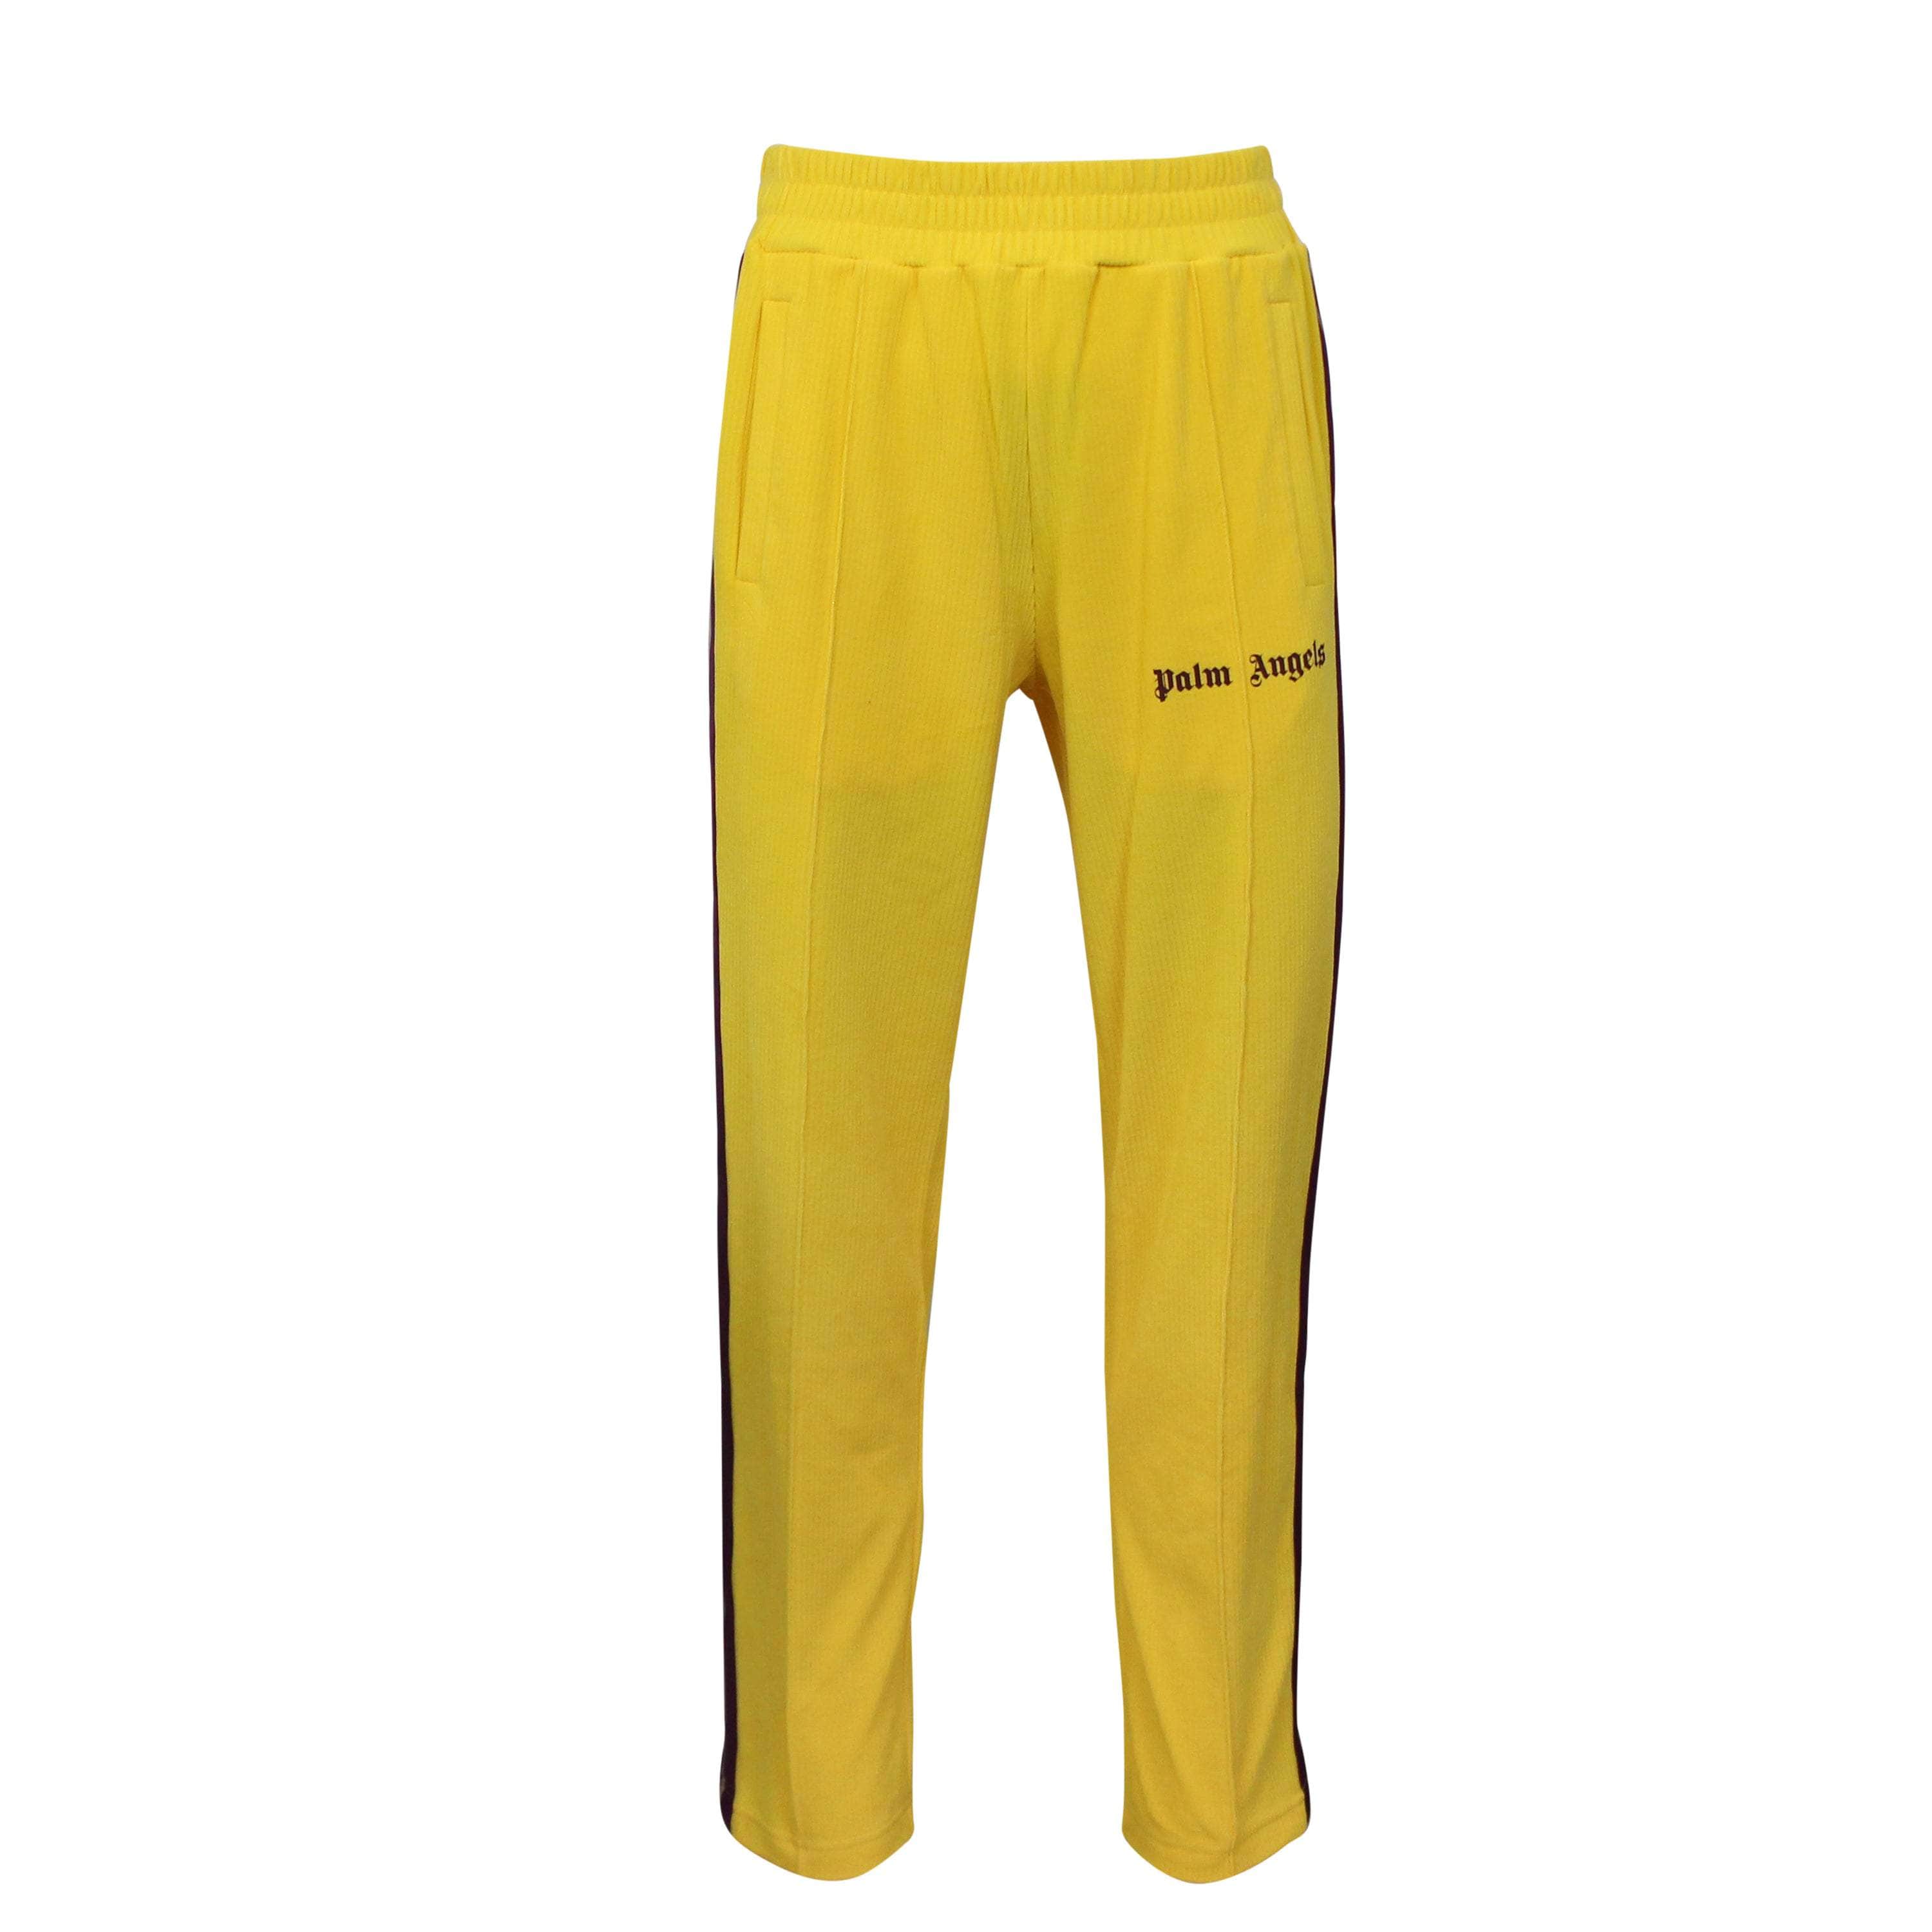 Palm Angels 250-500, channelenable-all, chicmi, couponcollection, main-clothing, mens-track-pants, palm-angels, shop375, Stadium Goods M Track Pants PLM-XBTM-0065/M PLM-XBTM-0065/M